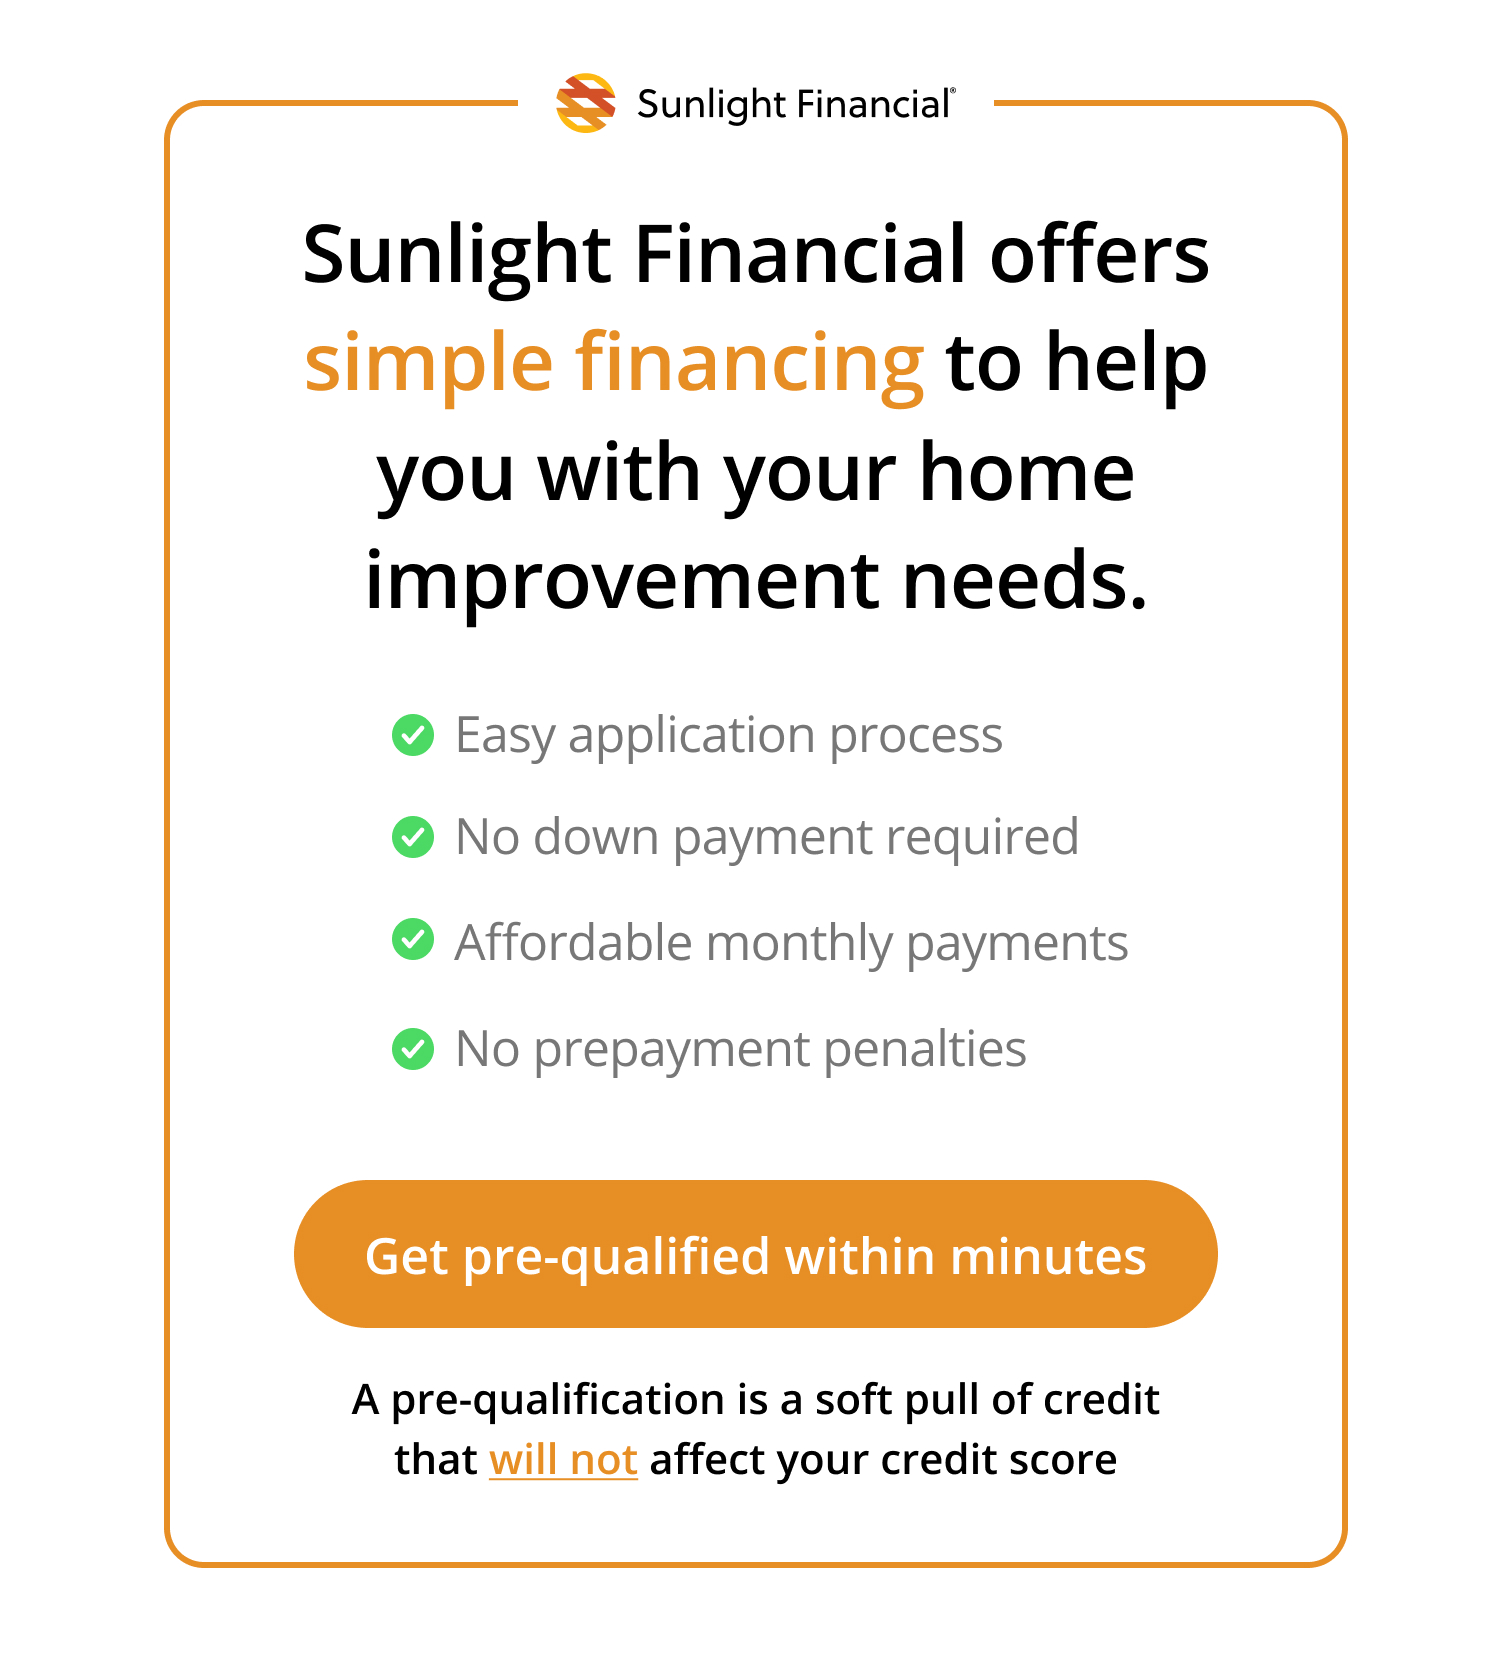 Get Pre-qualified for a Sunlight Financial loan